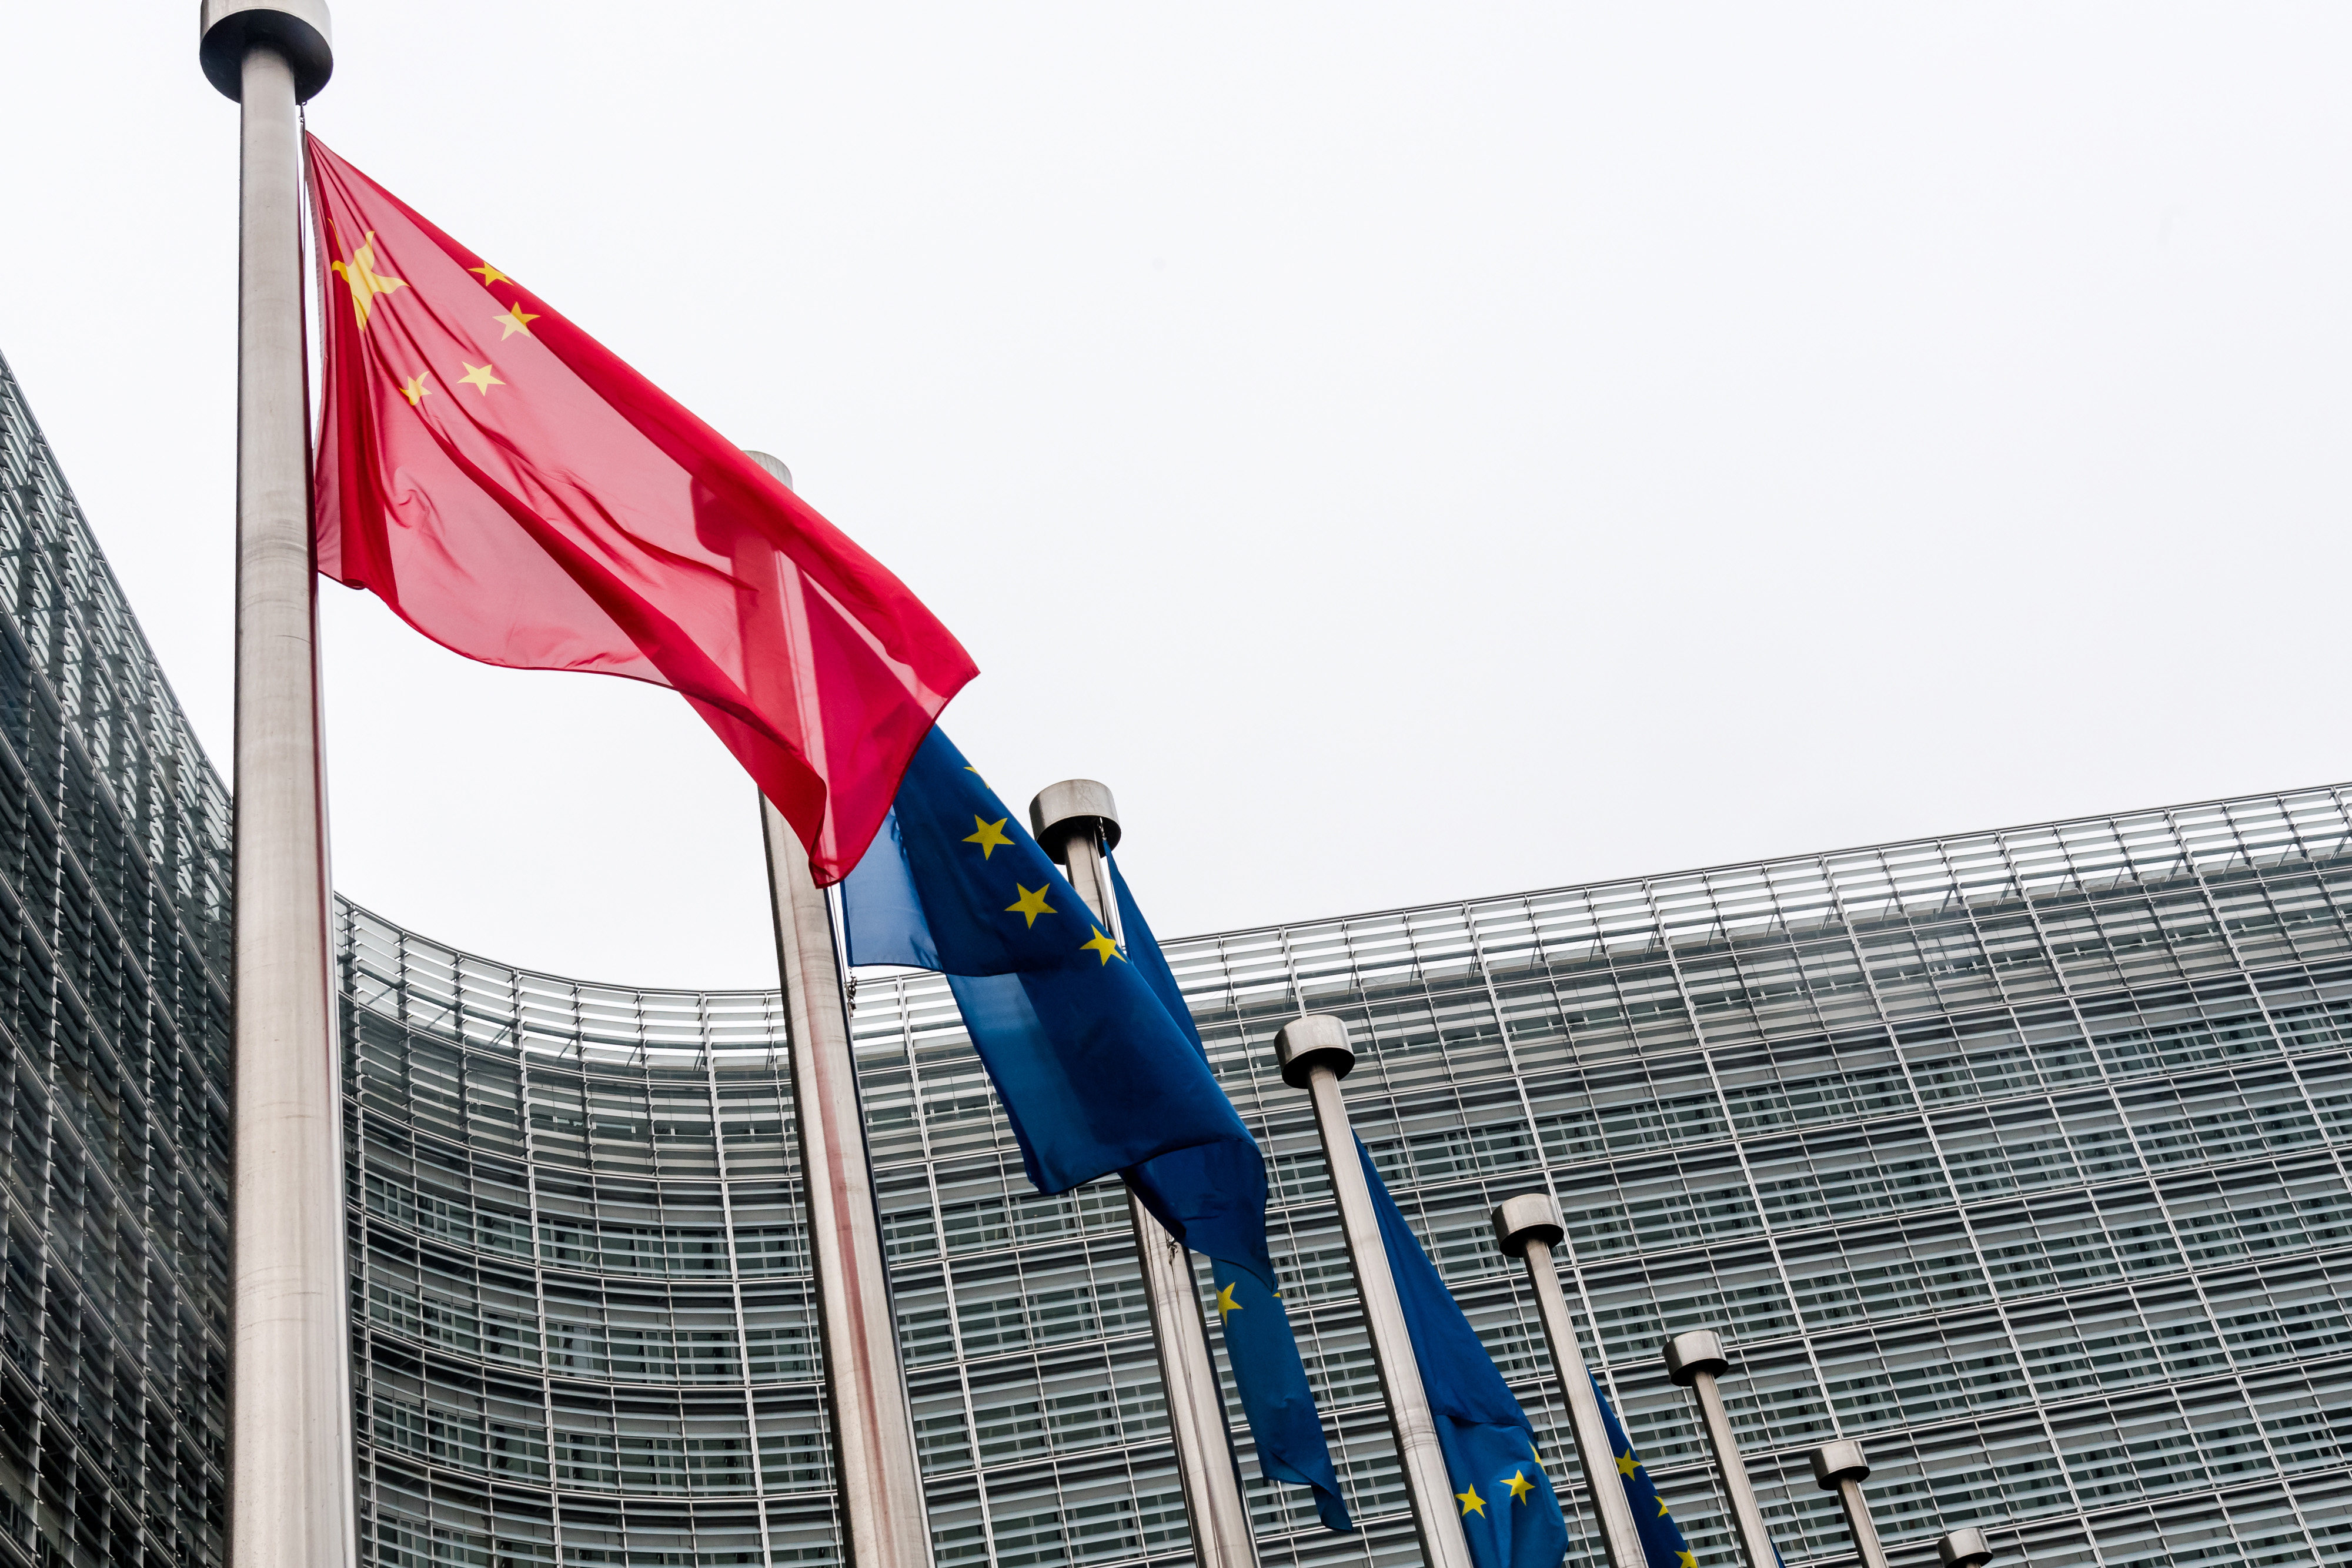 Beijing has not responded to proposed dates for trade talks with the EU, European officials say. Photo: Bloomberg